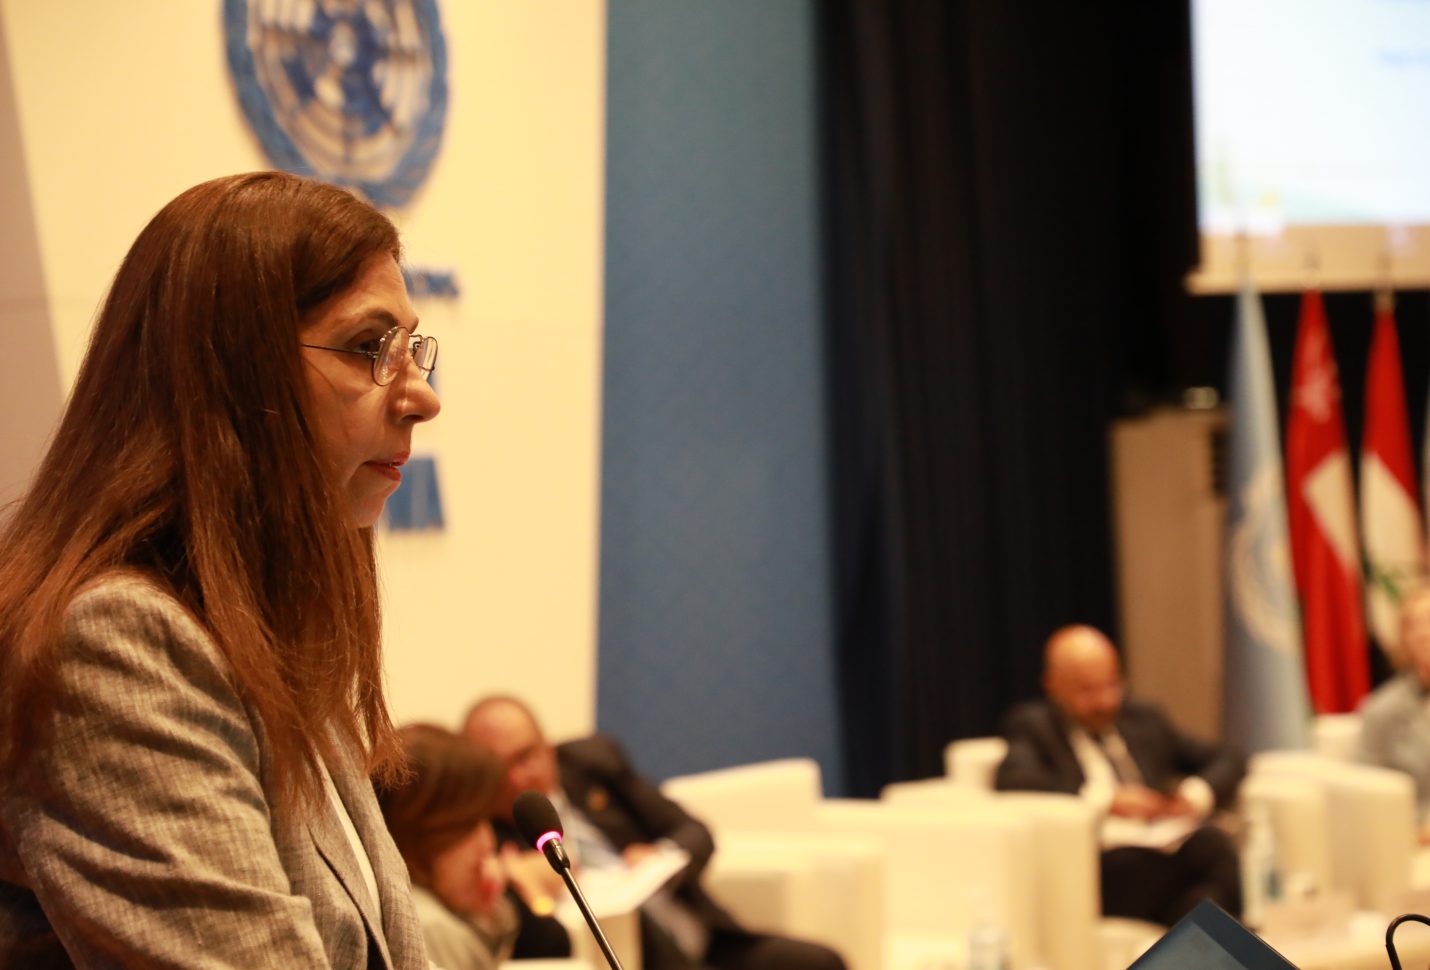 ESCWA official: Arab States received about $34 bn in climate finance over past decade